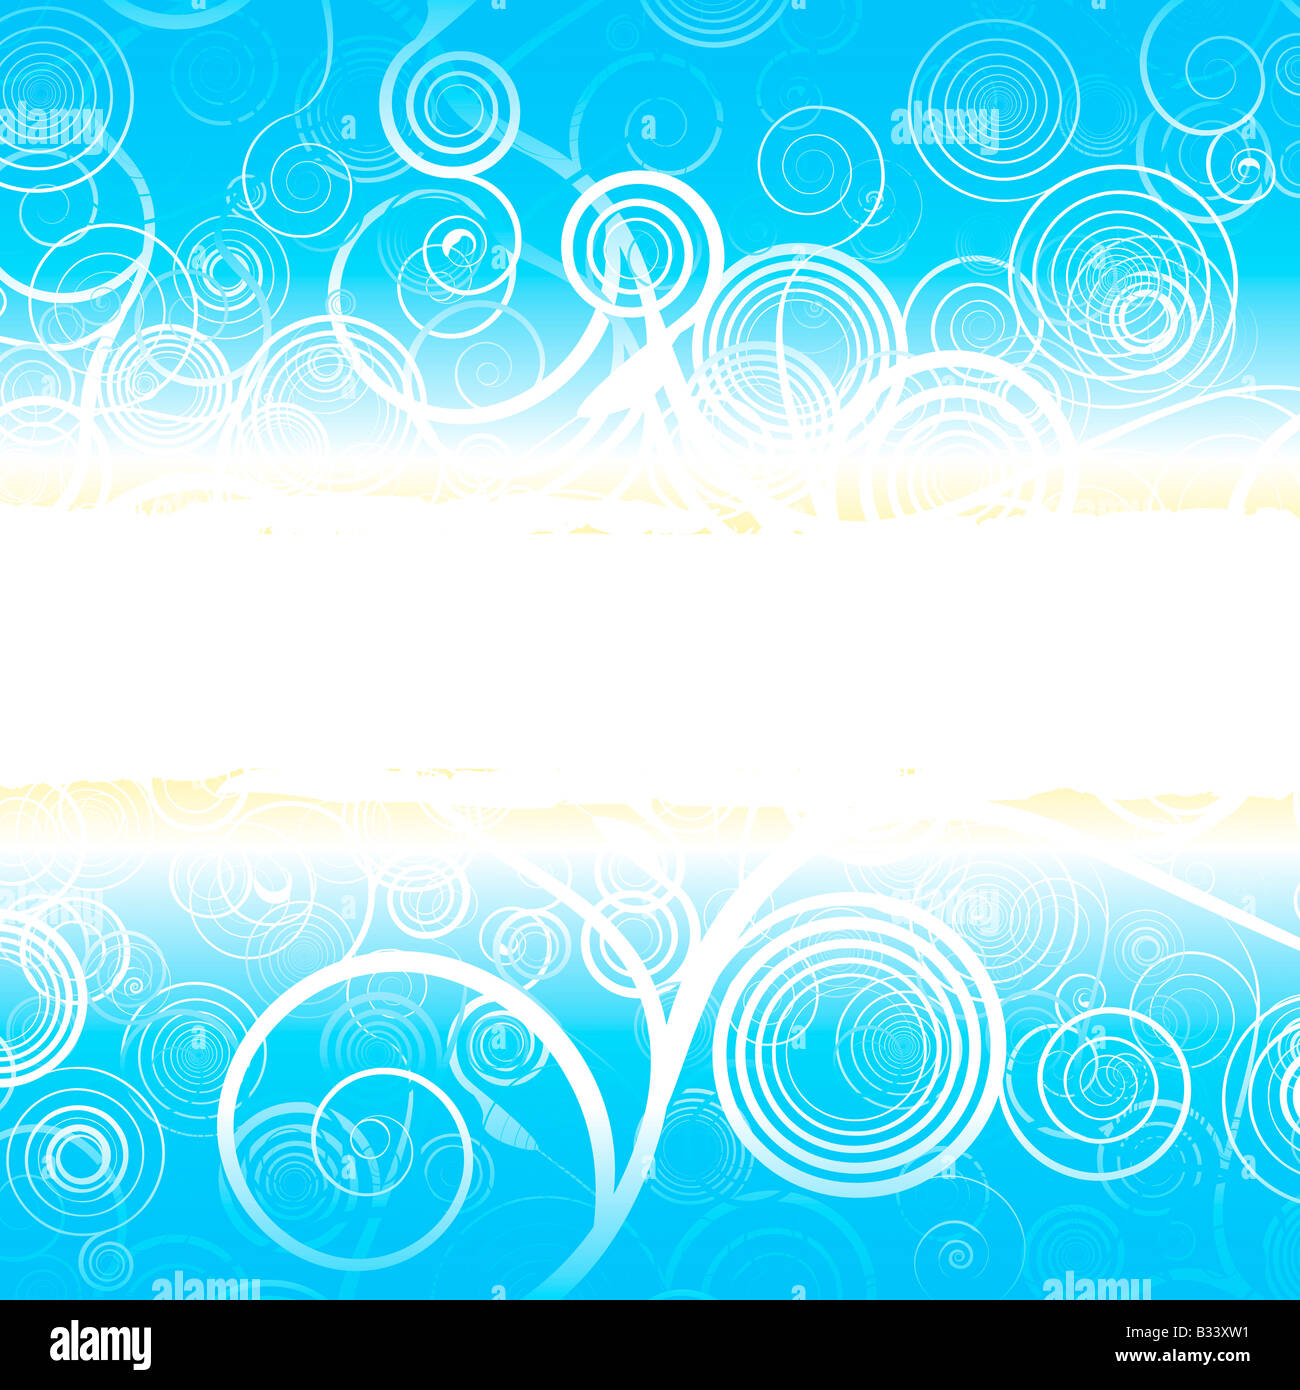 Vector illustration of a celebration background with spiral patterns and big copy space sign in the middle Stock Photo